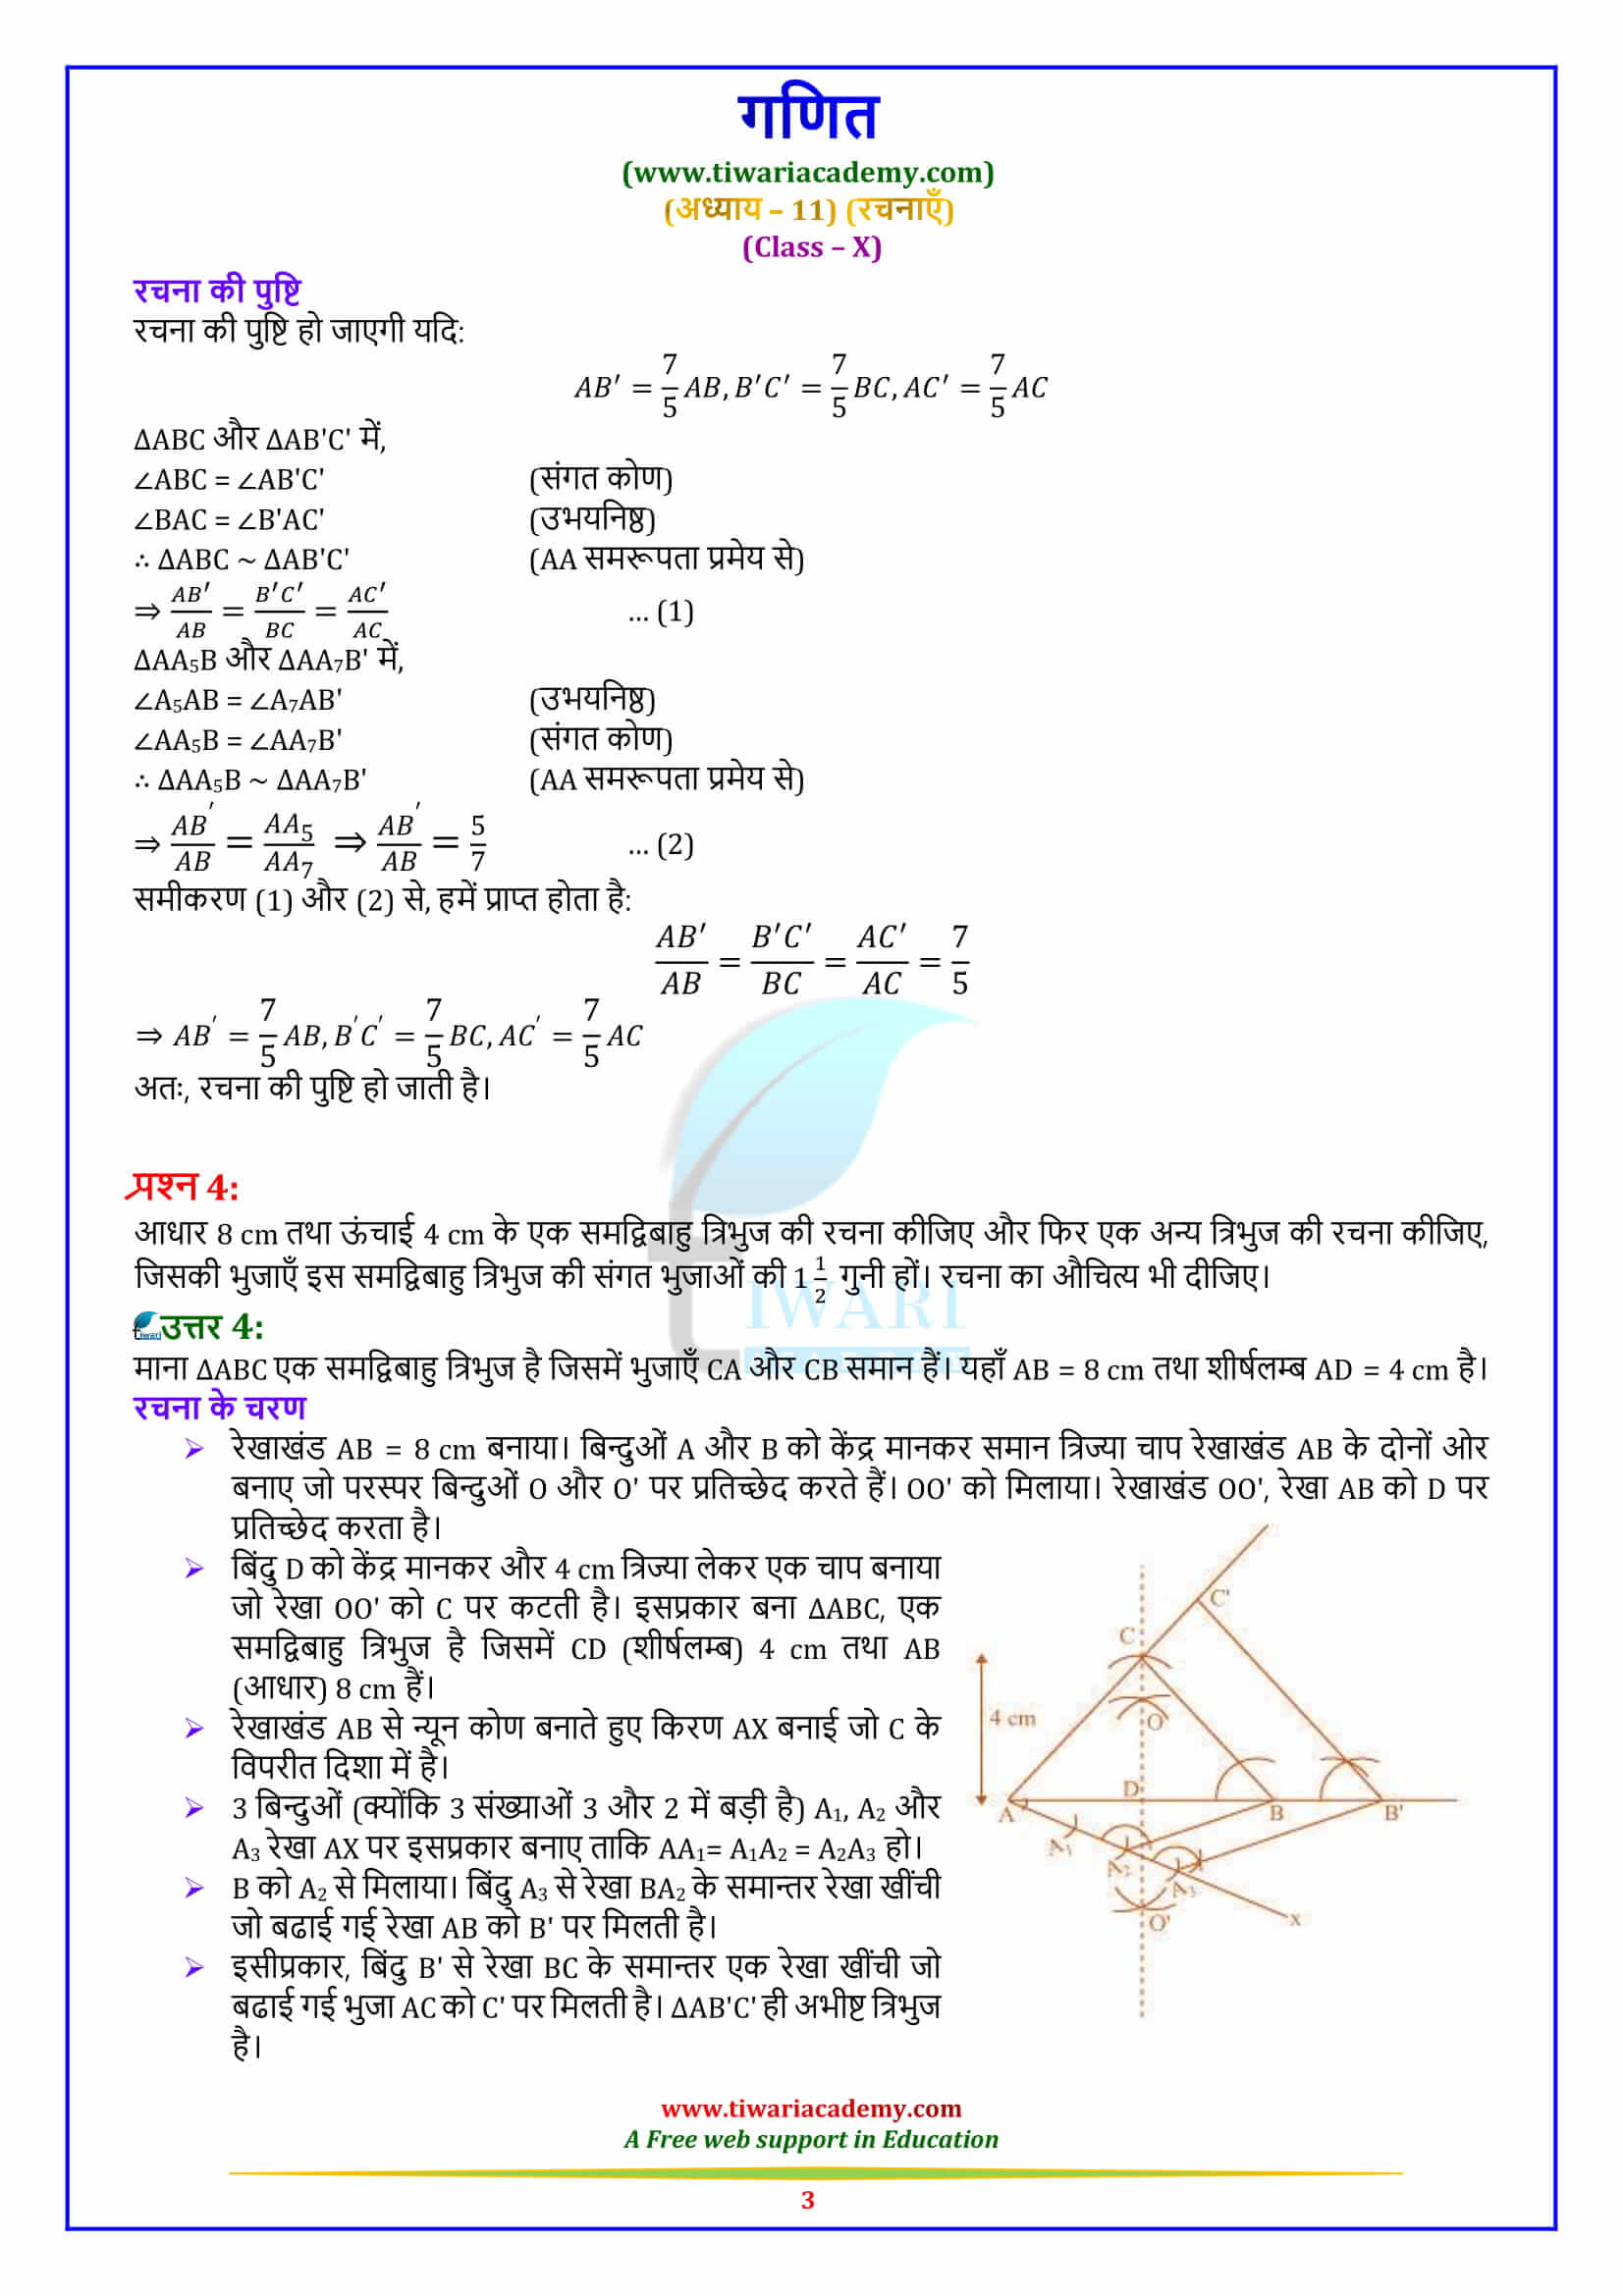 NCERT Solutions for Class 10 Maths Chapter 11 Exercise 11.1 all questions